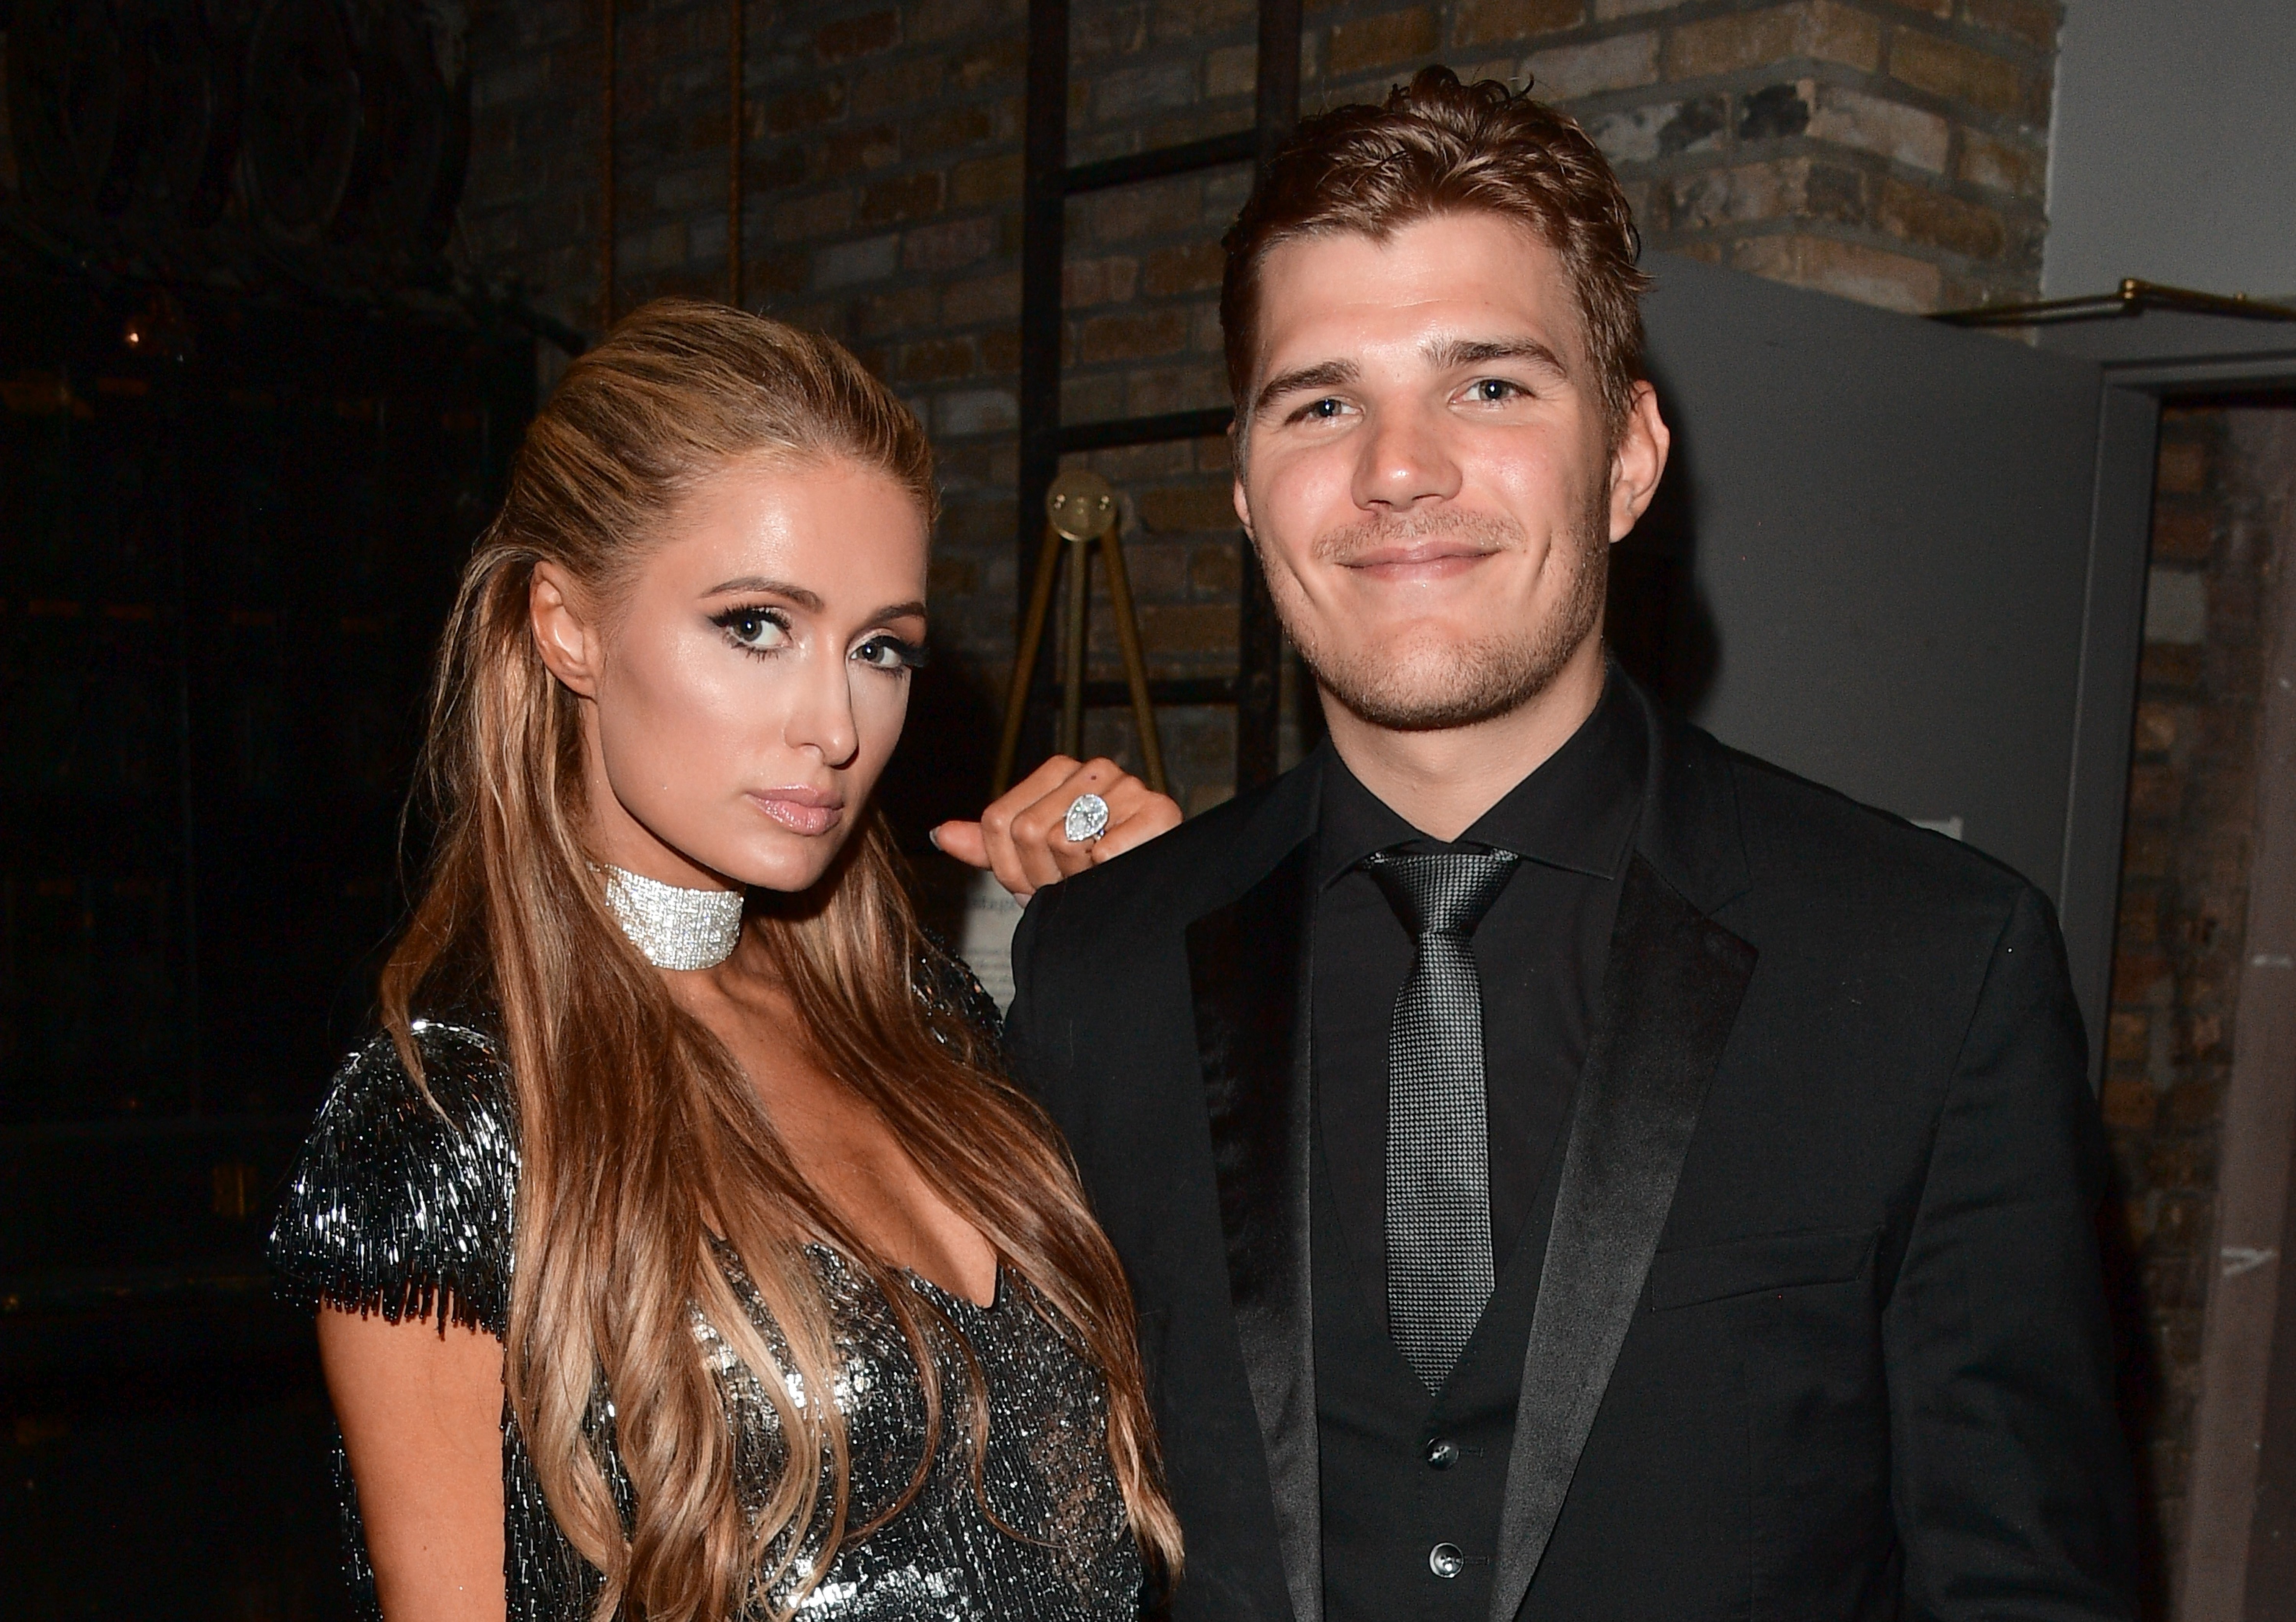 Paris Hilton (L) and Chris Zylka attend the "The Death And Life Of John F. Donovan" premiere during 2018 Toronto International Film Festival at Winter Garden Theatre on September 10, 2018 in Toronto, Canada | Source: Getty Images 